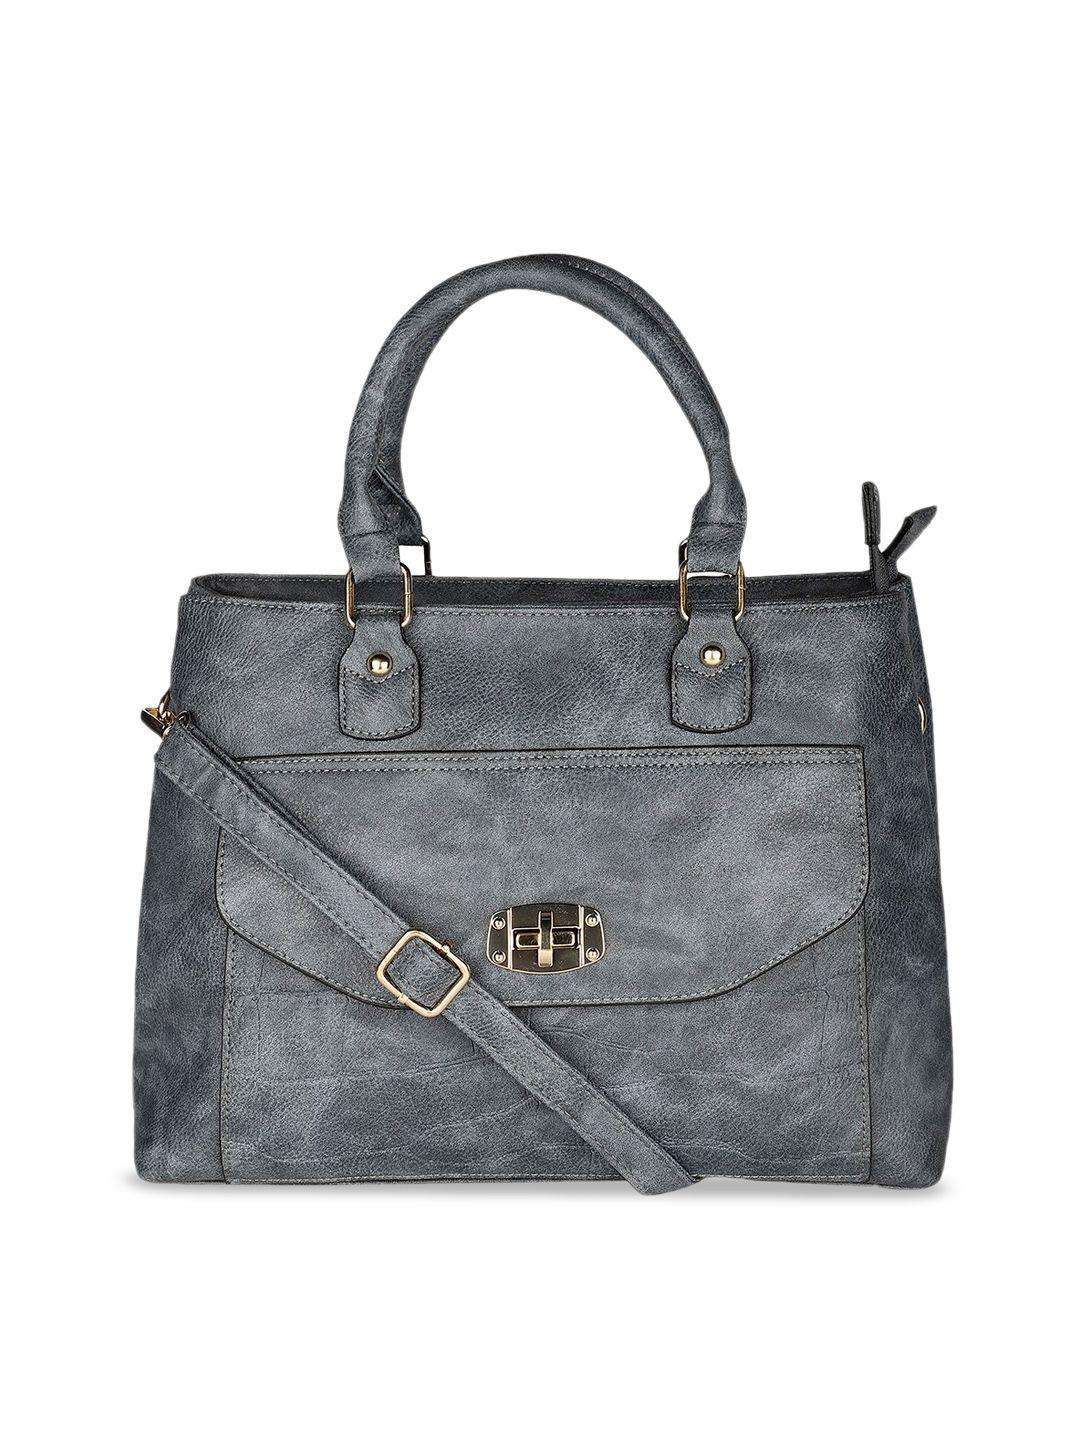 marie claire grey leather structured satchel bag